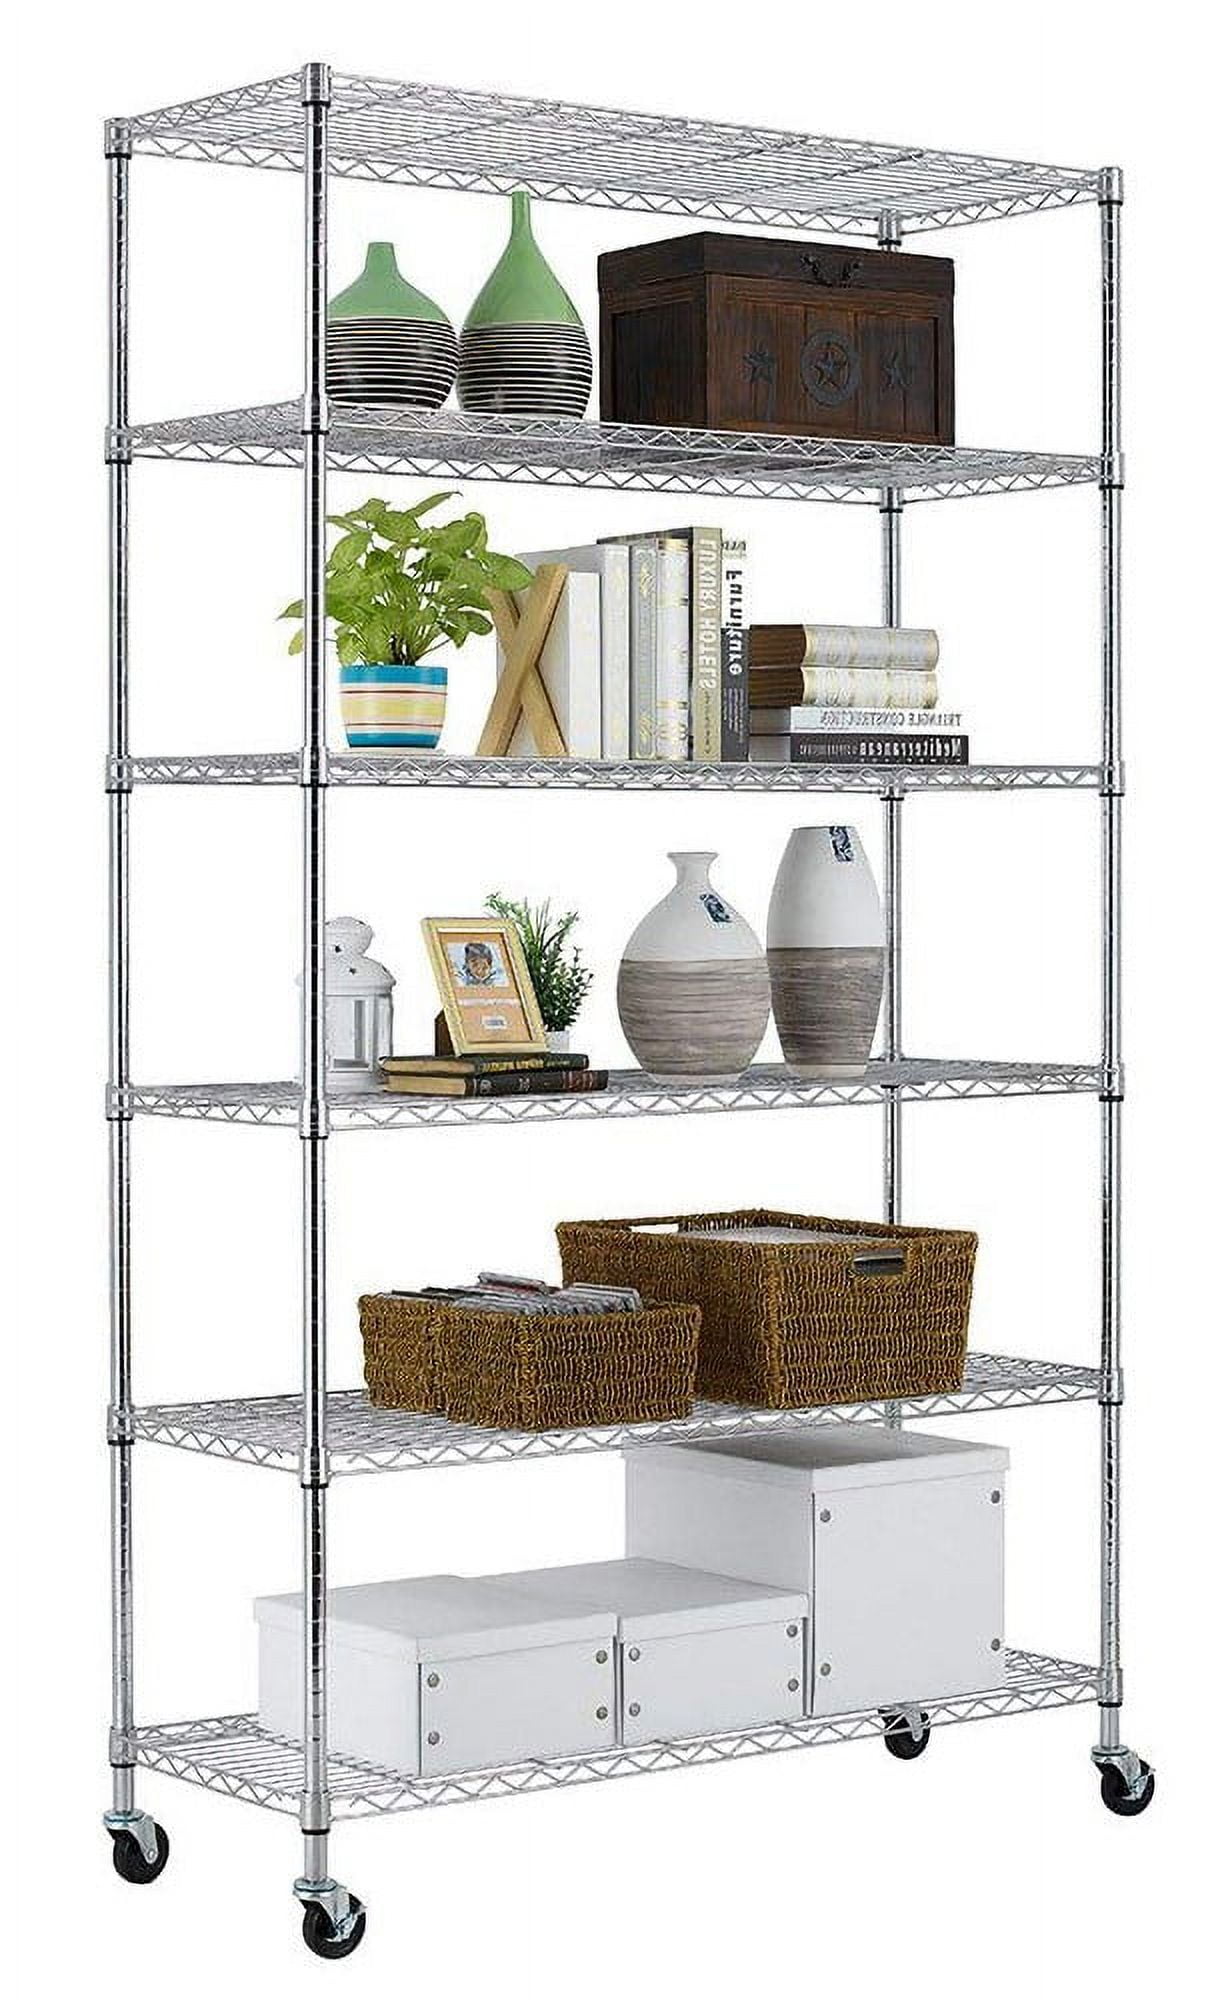 Commercial Kitchen Shelving Systems ⋆ Shelving Systems by E-Z Shelving  Systems, Inc.